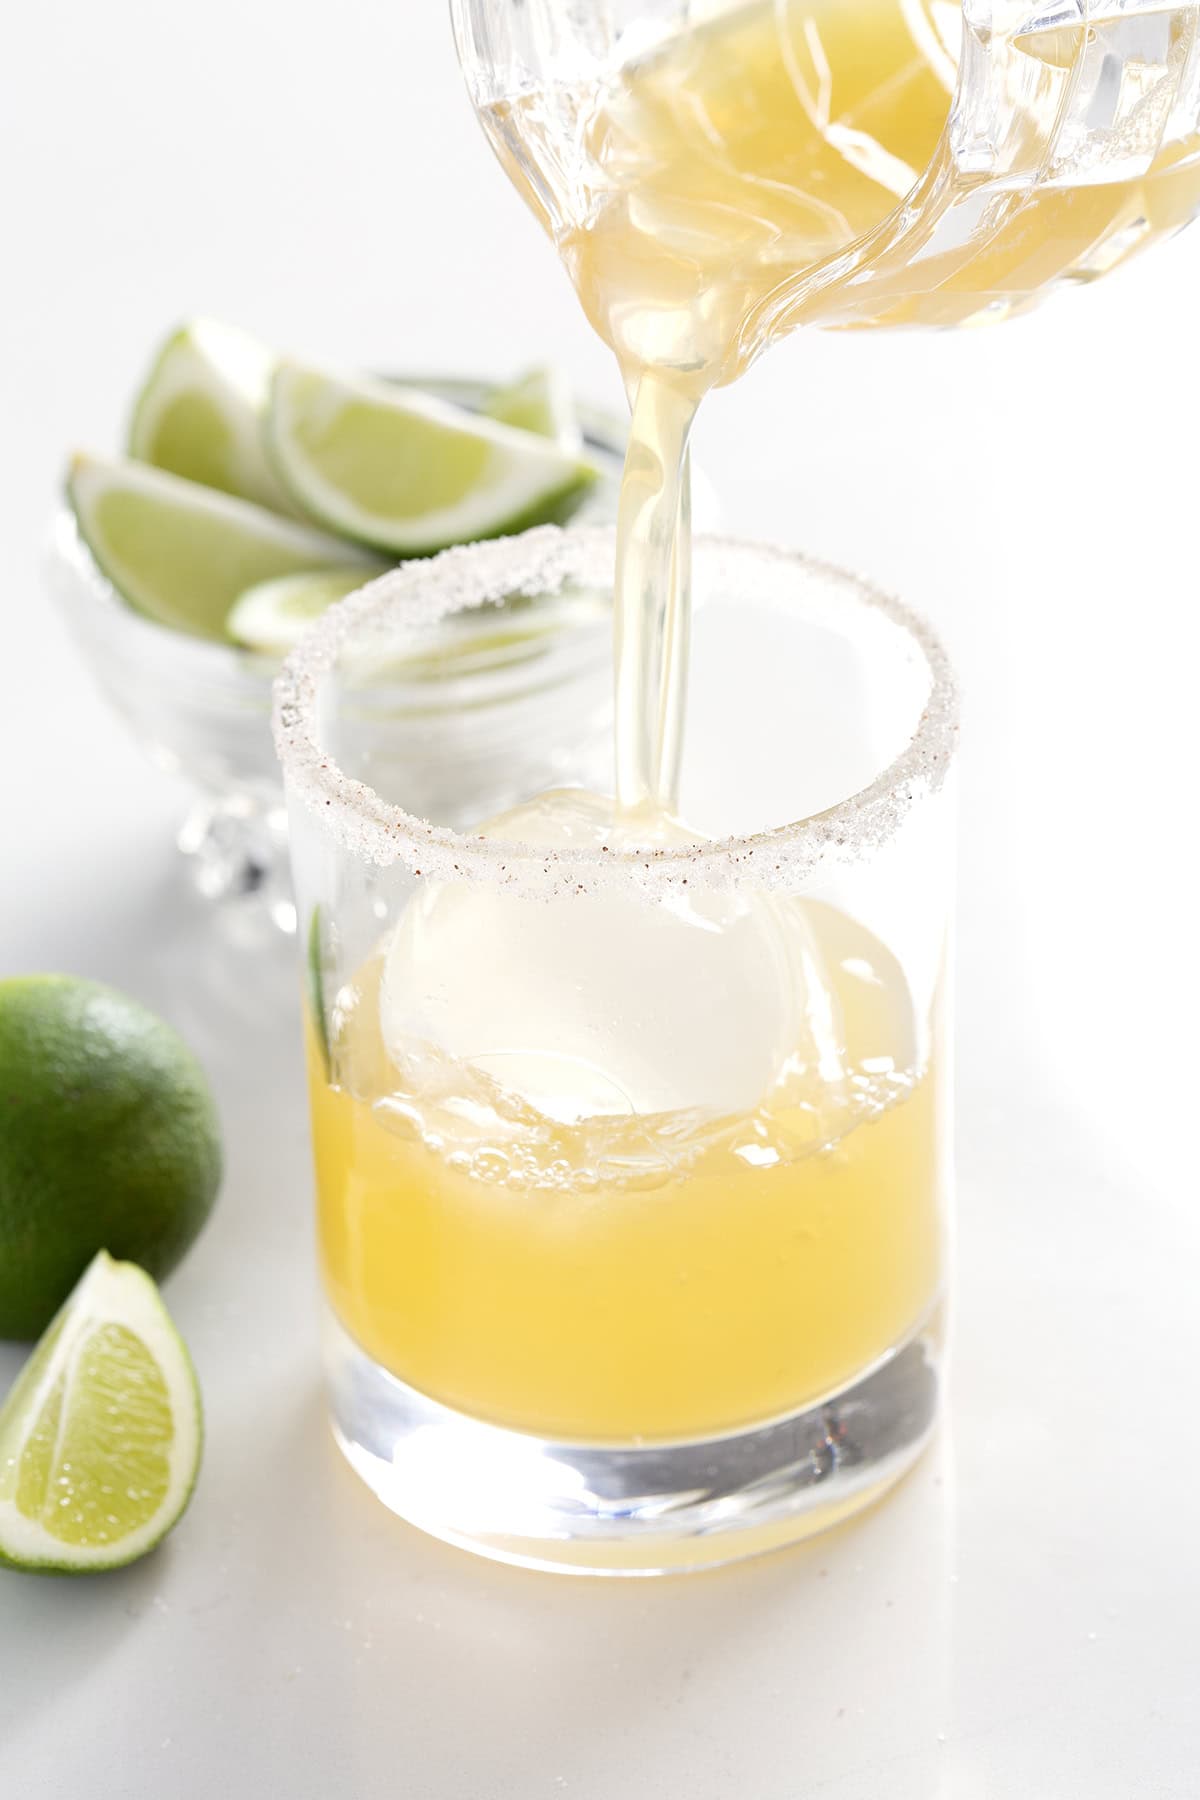 pouring margarita over ice into glass.